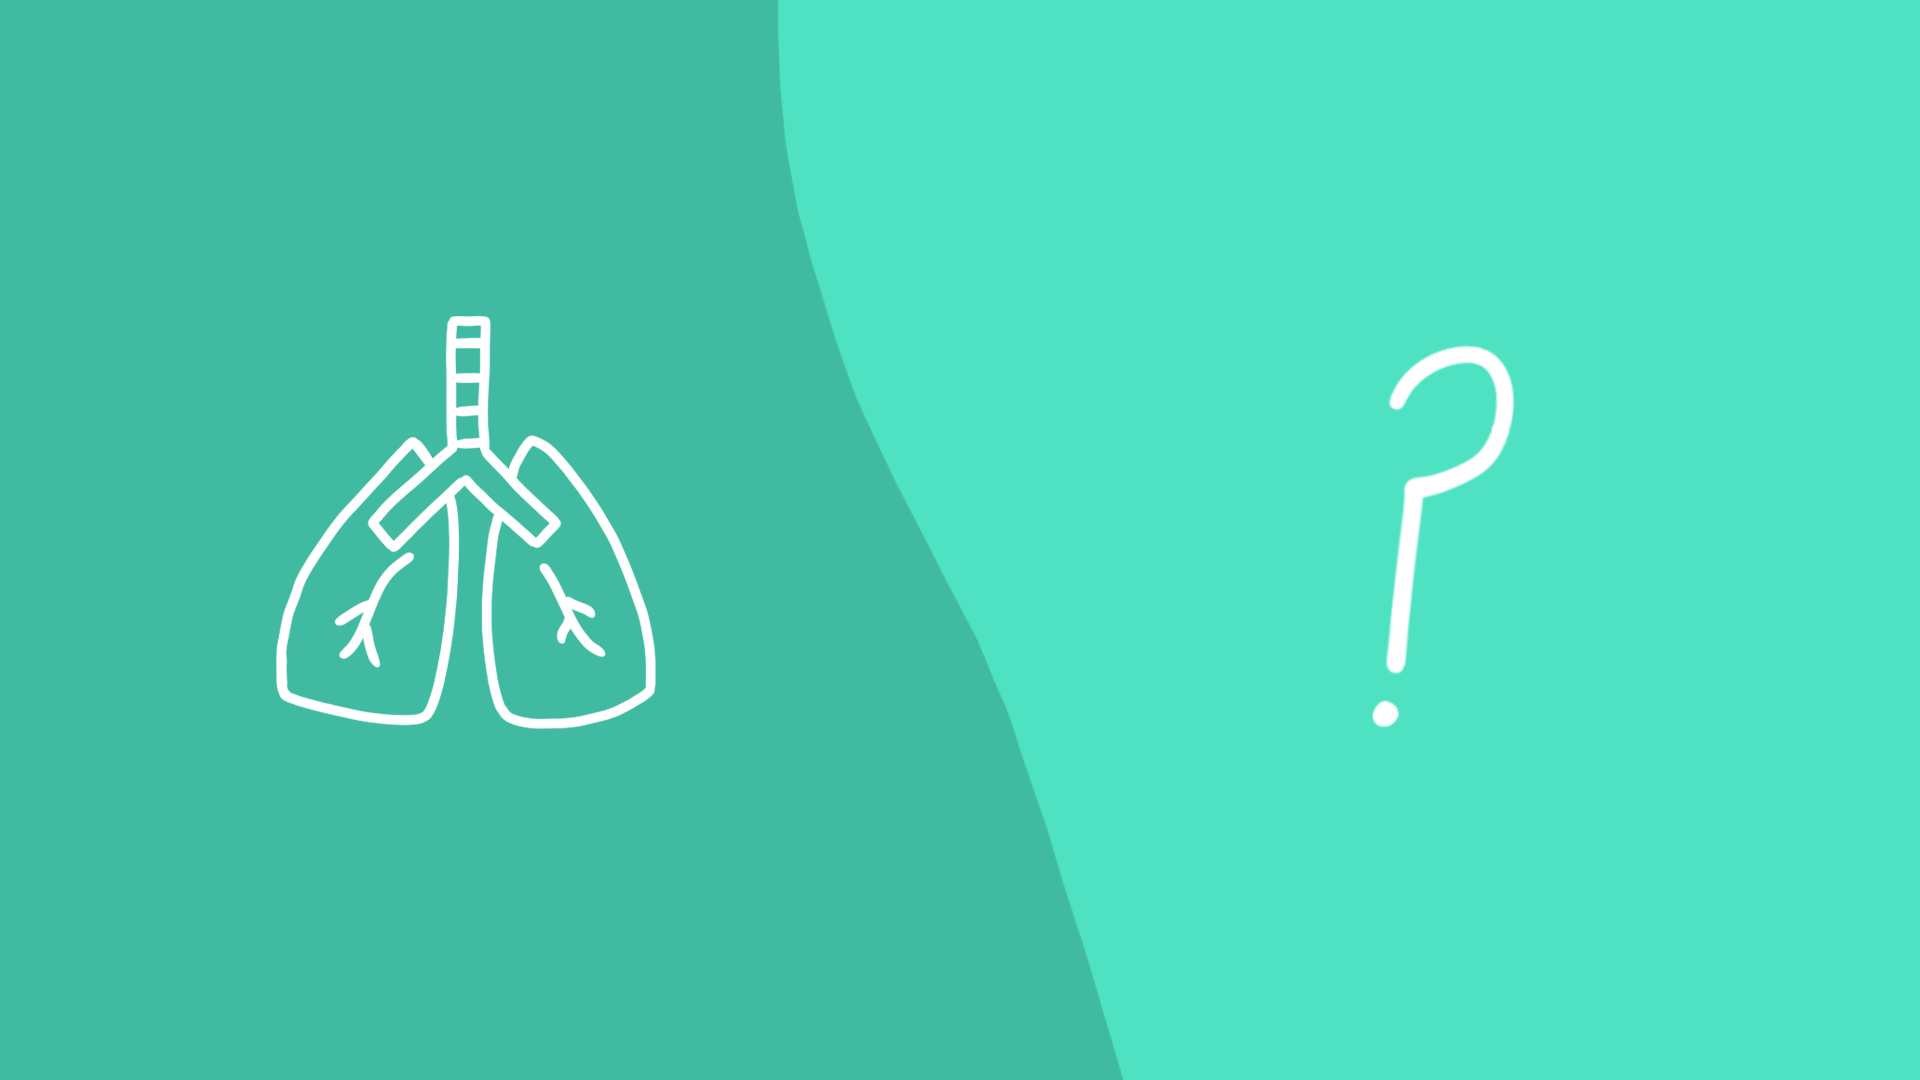 Lungs with question mark representing Hodgkins vs. non-Hodgkins lymphoma